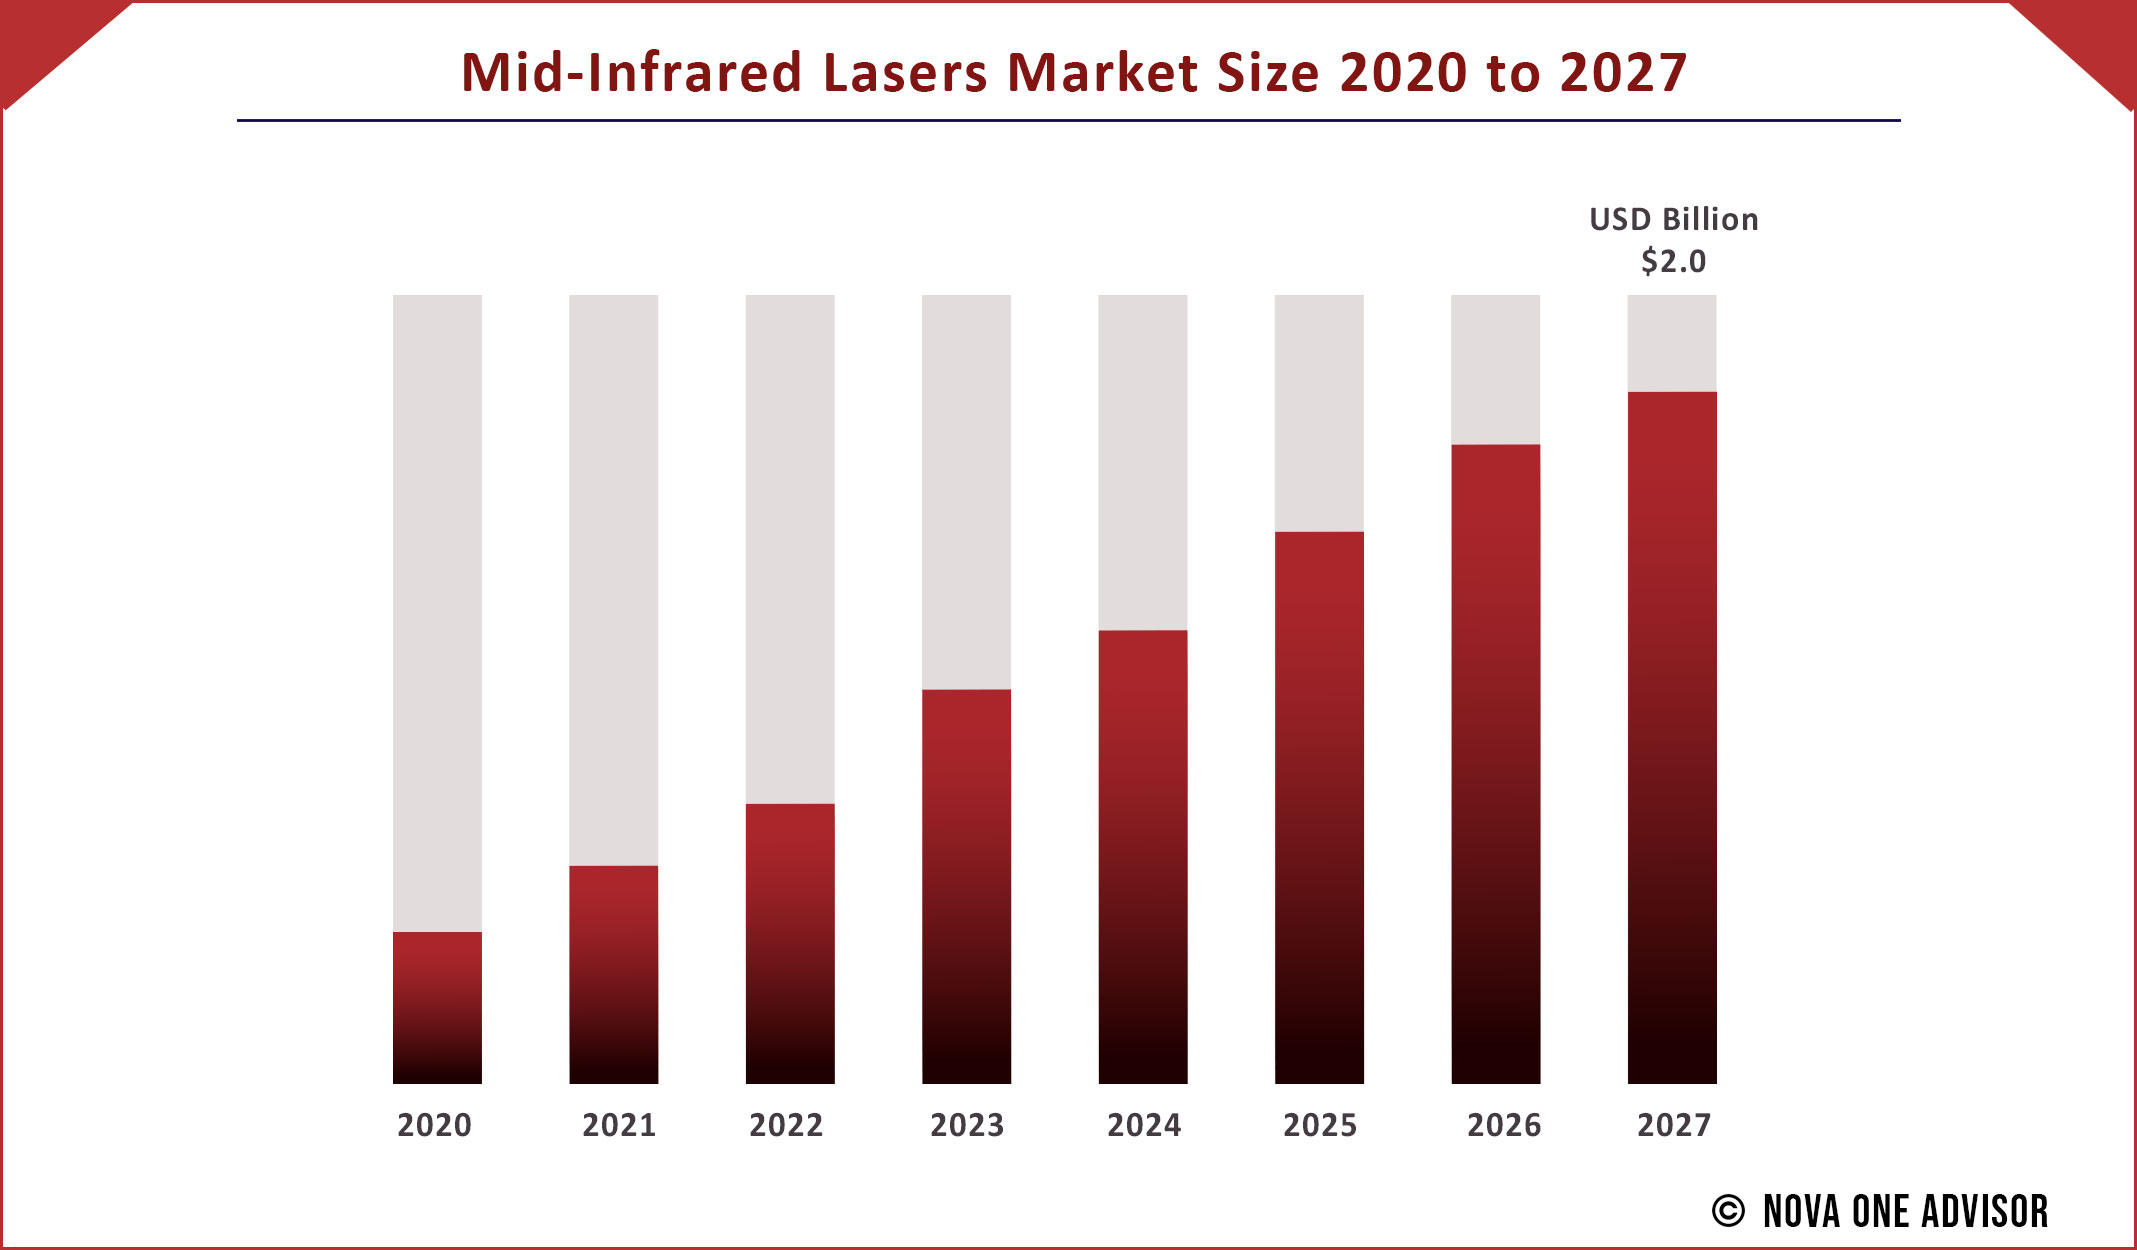 Mid-Infrared Lasers Market Size 2020 to 2027